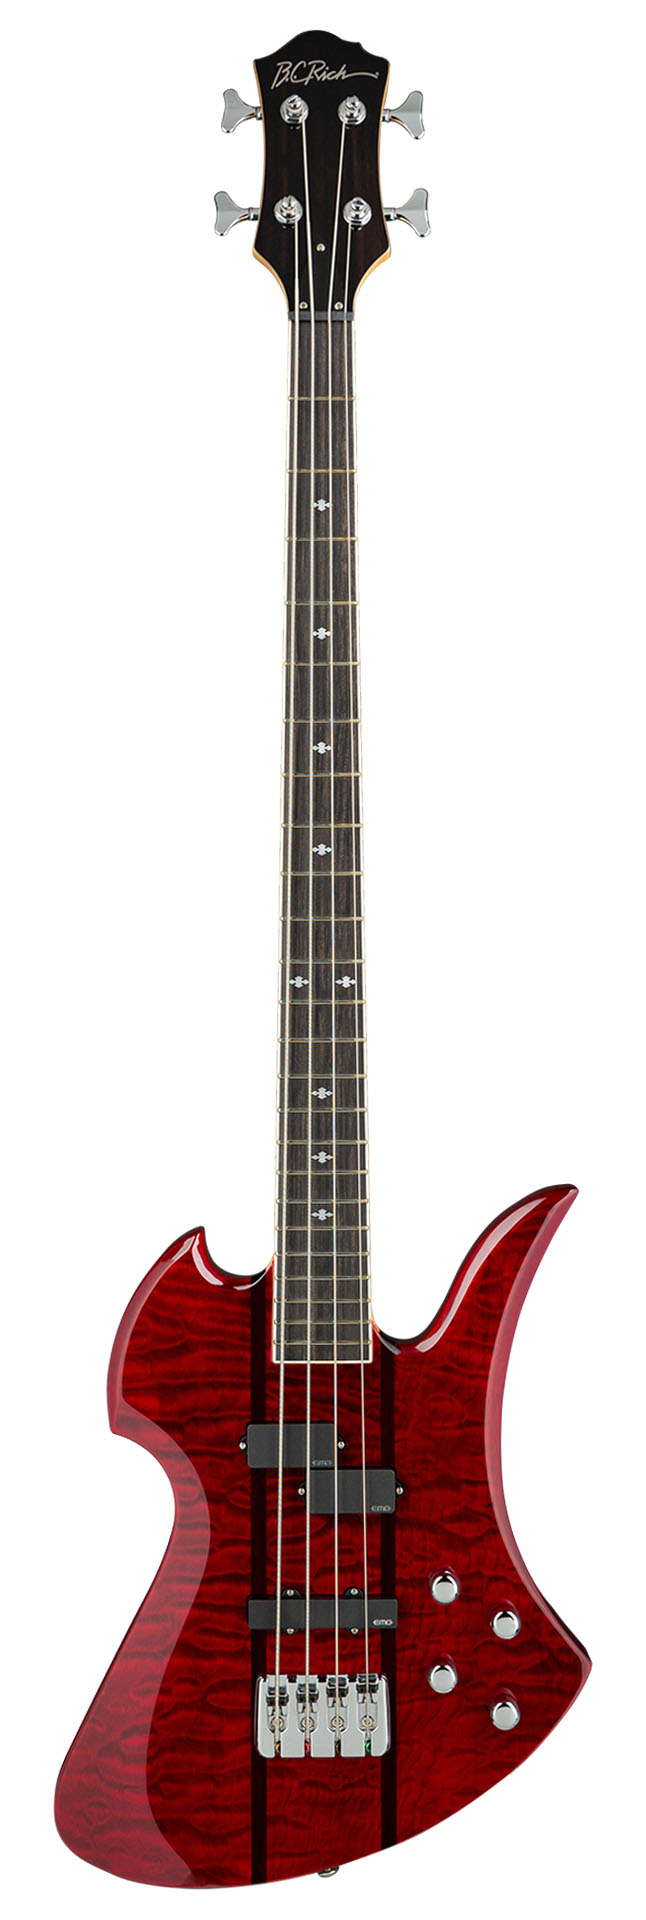 B.C. Rich Heritage Classic Mockingbird Bass, 4-String - Quilted Maple Top, Transparent Red